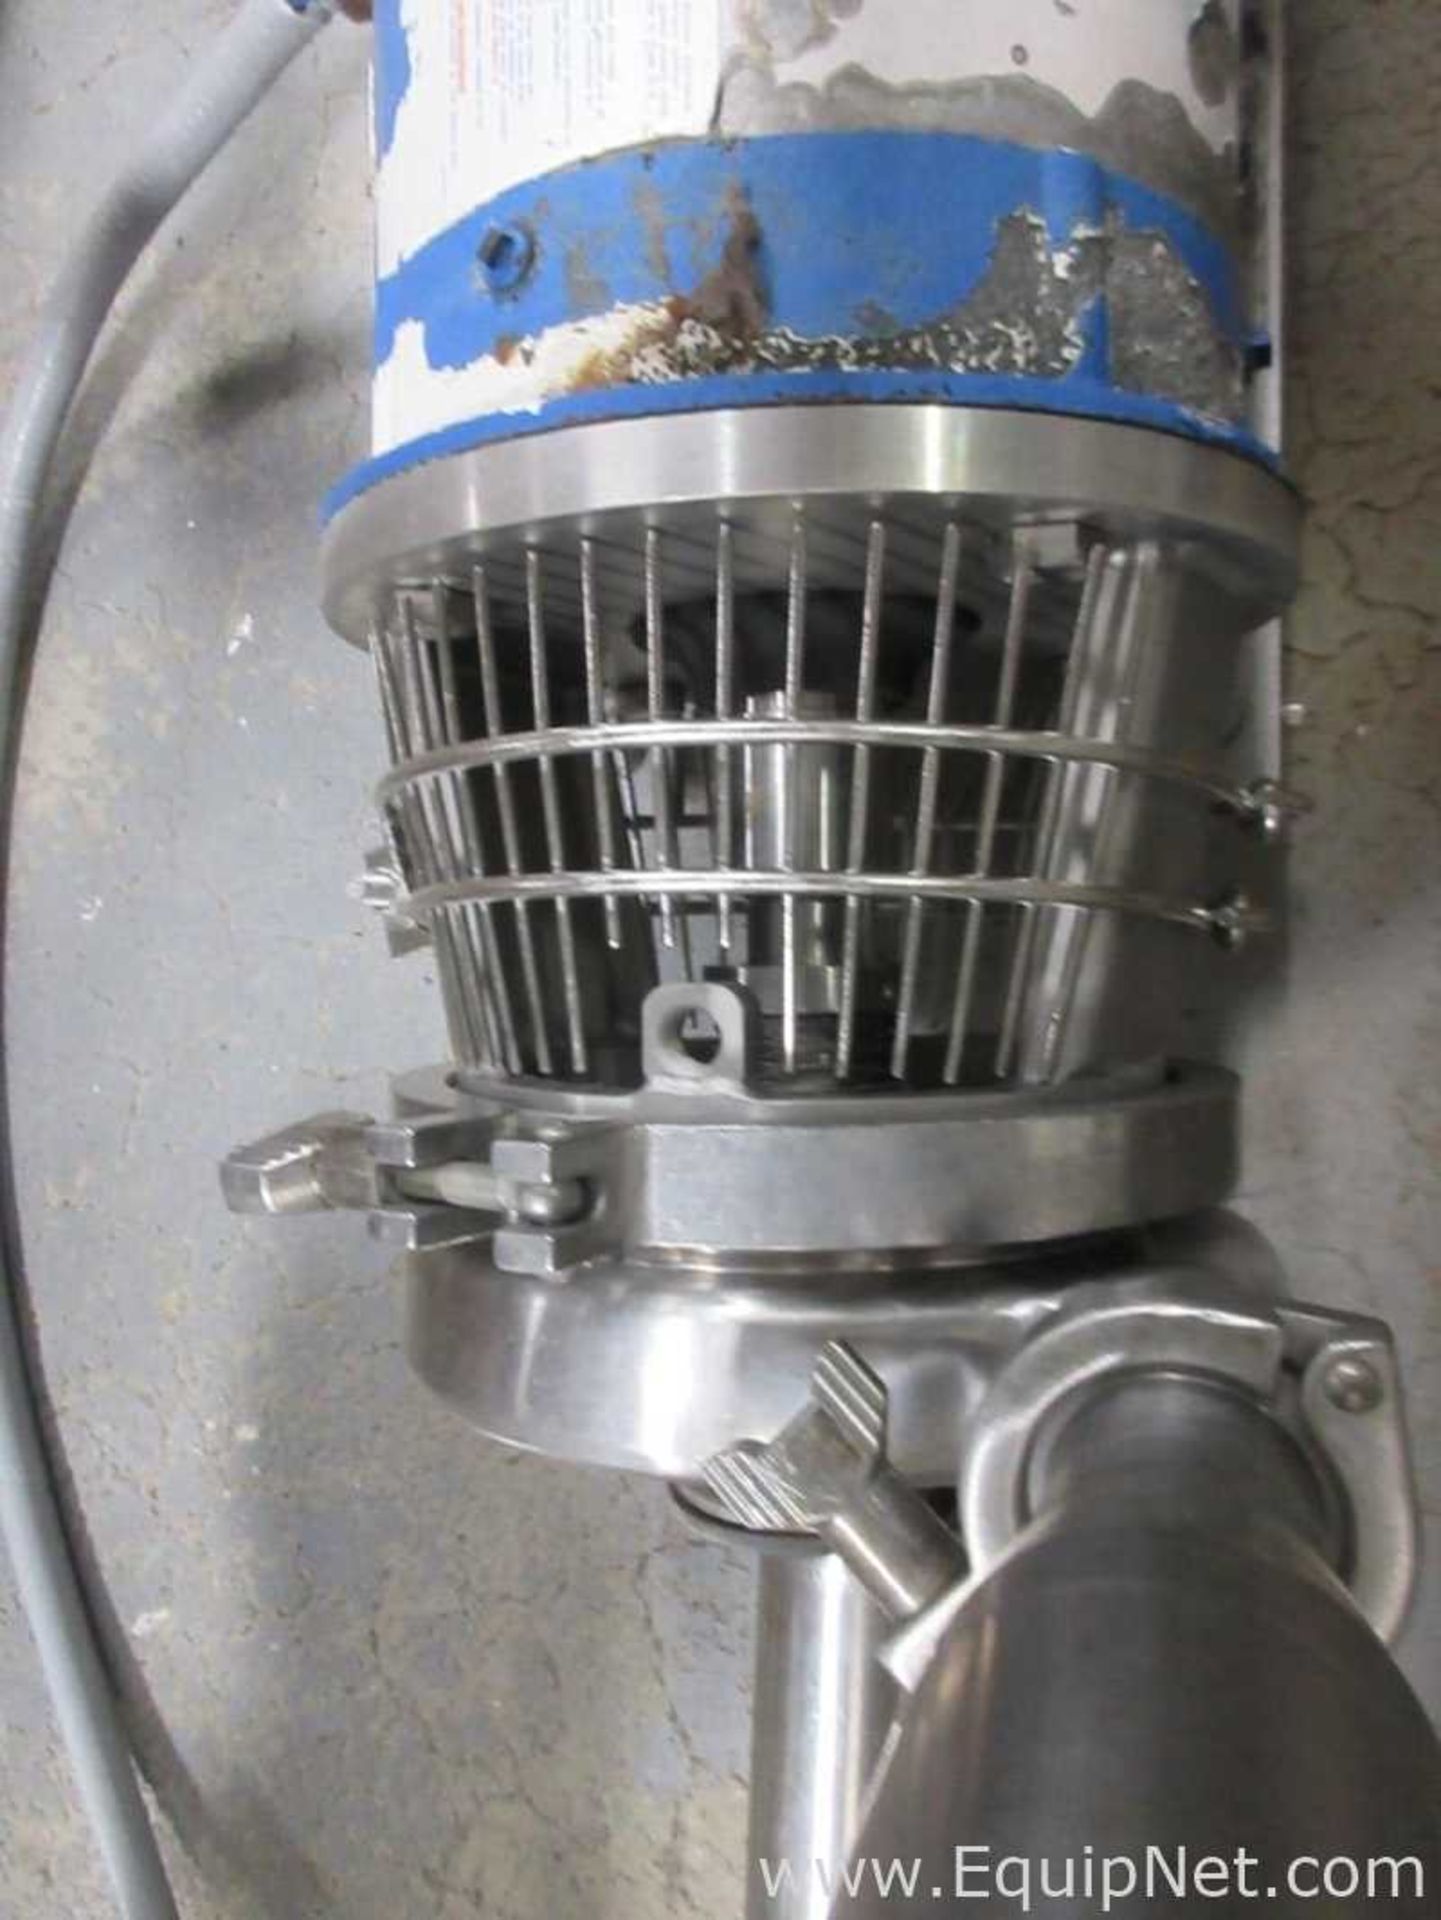 Sanitary Stainless Steel 3 HP Centrifugal Pump - Image 3 of 5